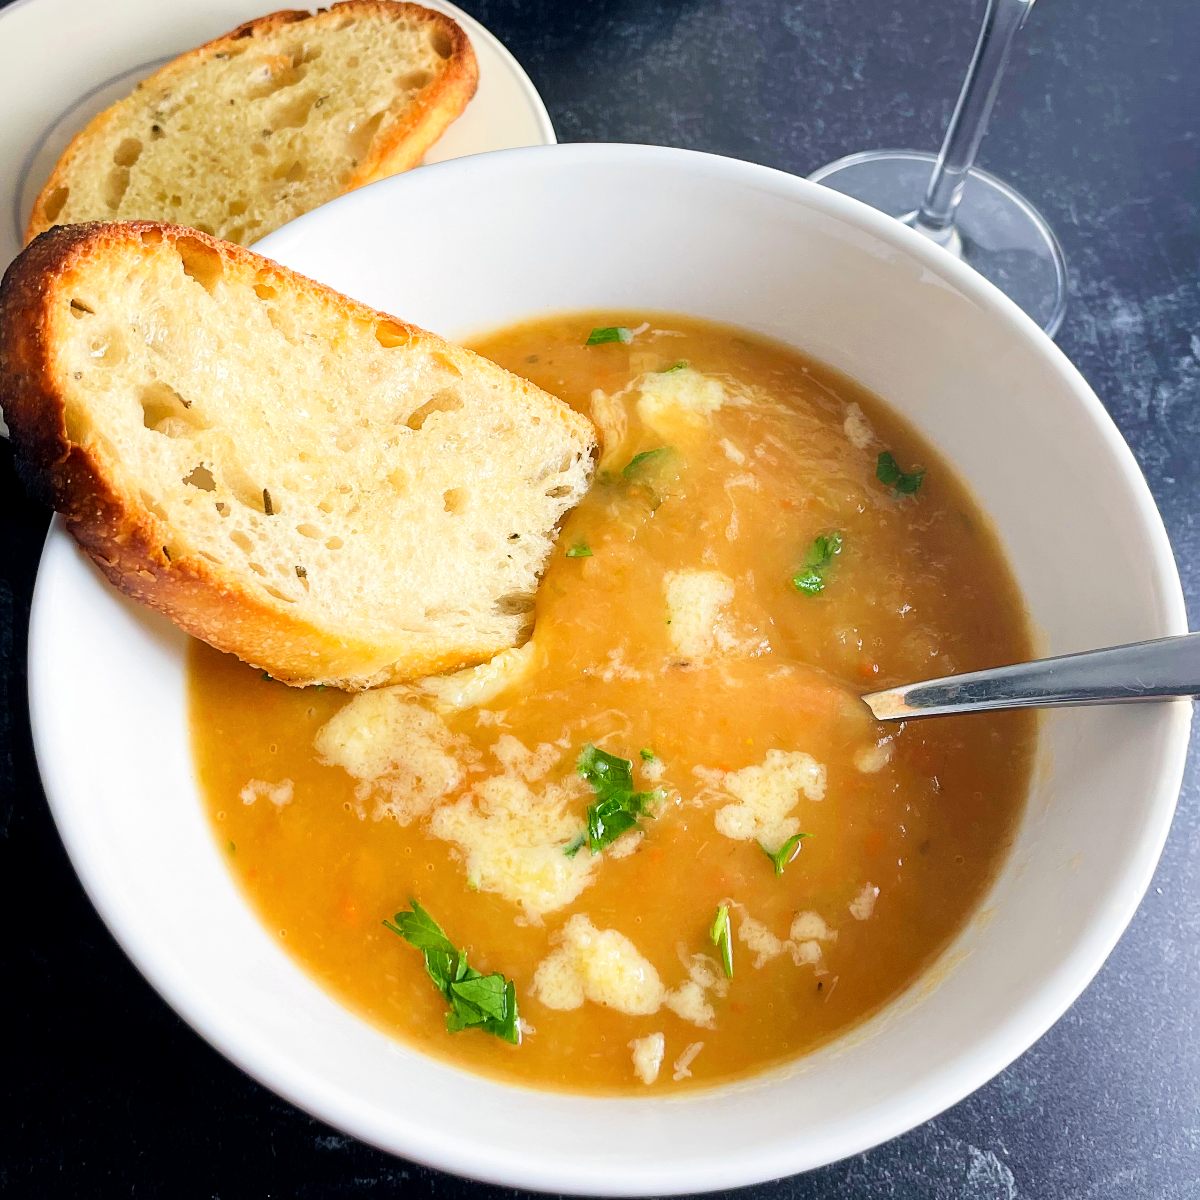 Irish vegetable soup served in a white bowl with toasted bread.